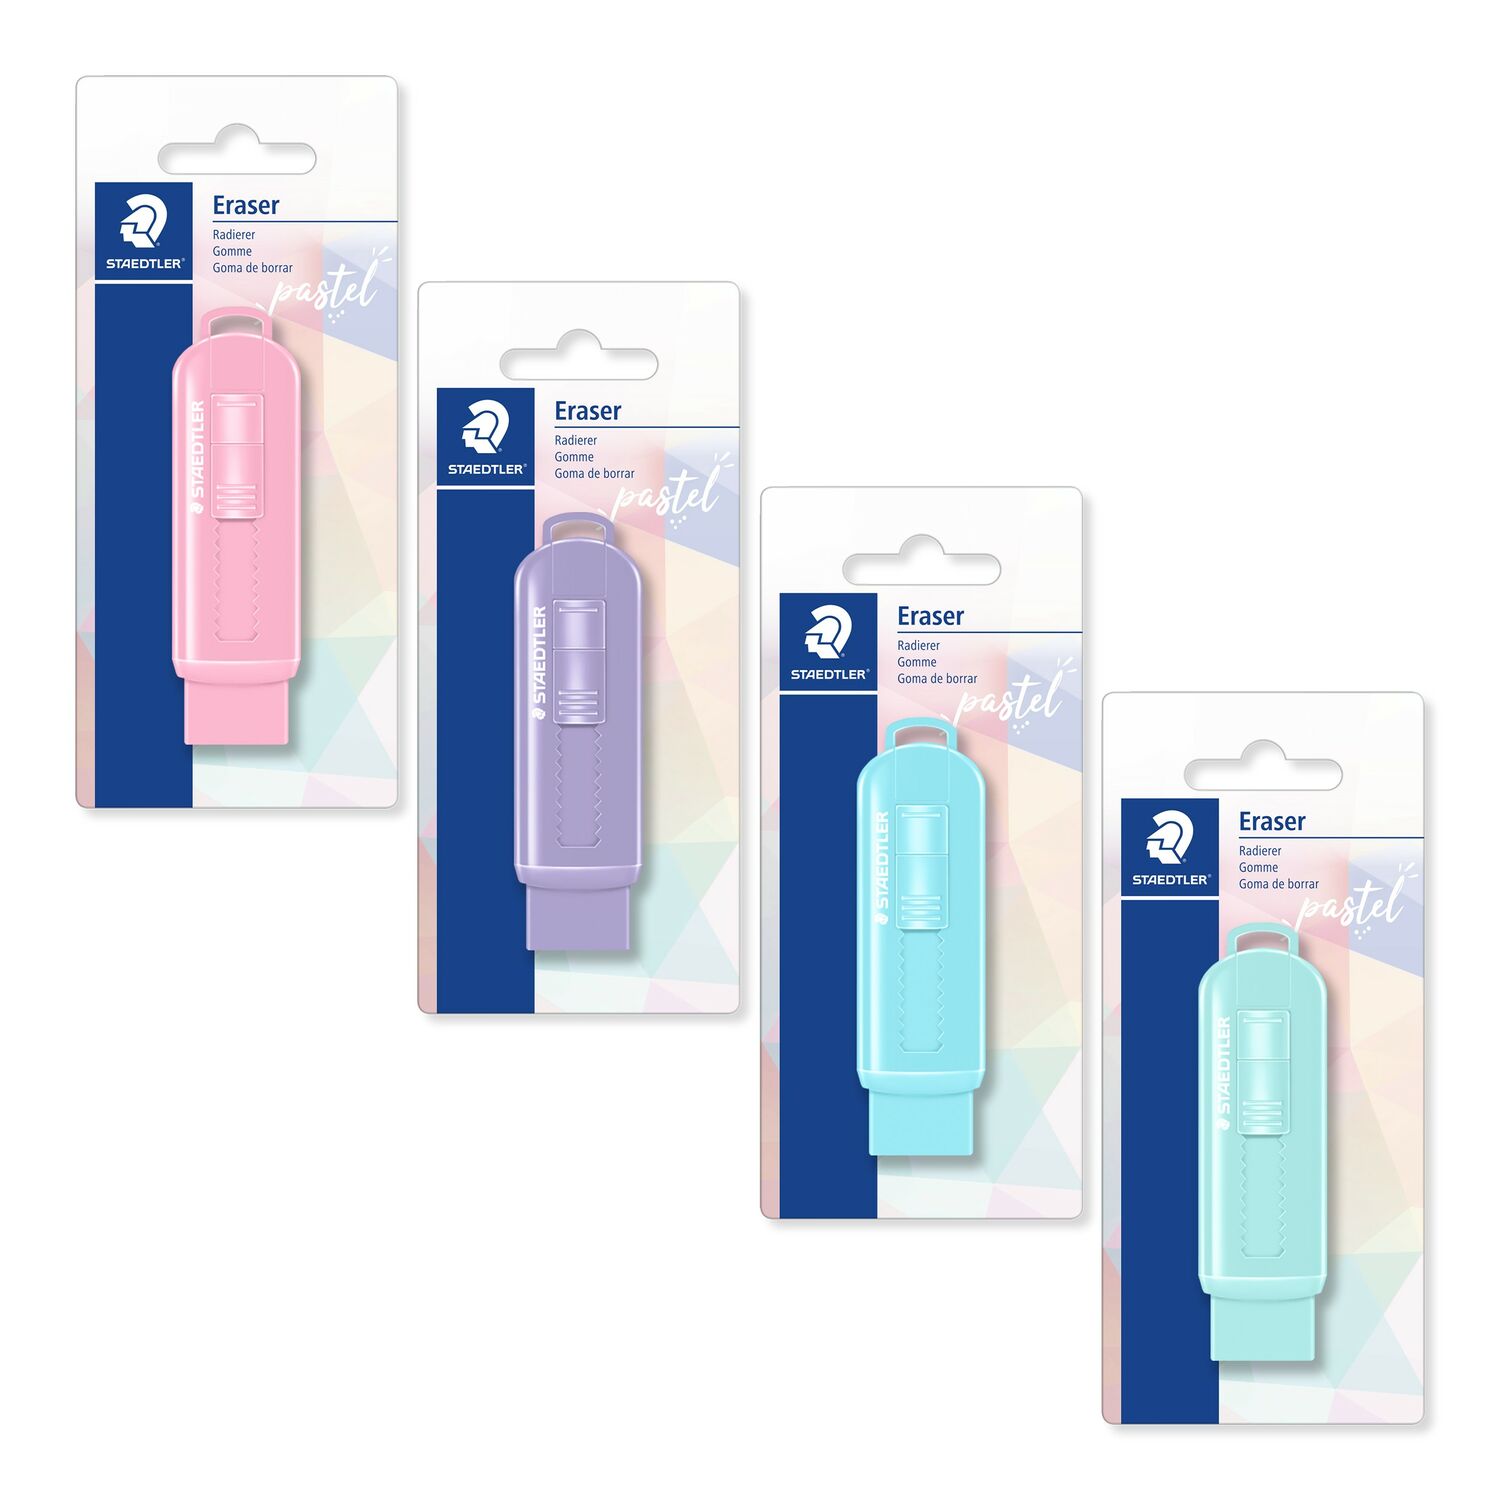 Blistercard containing 1 eraser in 4 assorted pastel colours